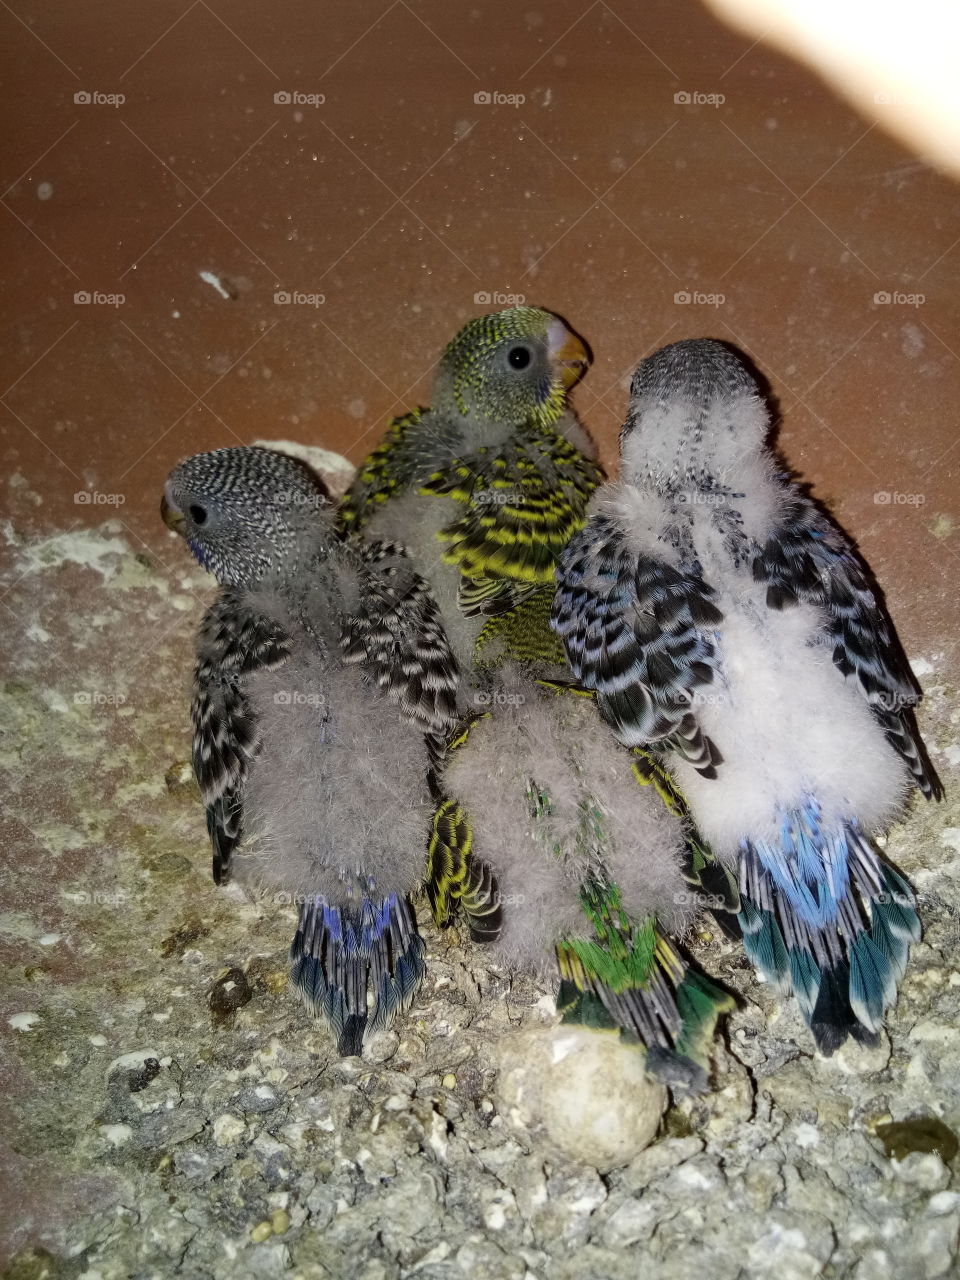 my pets in home..budgies parrots different colours adorable